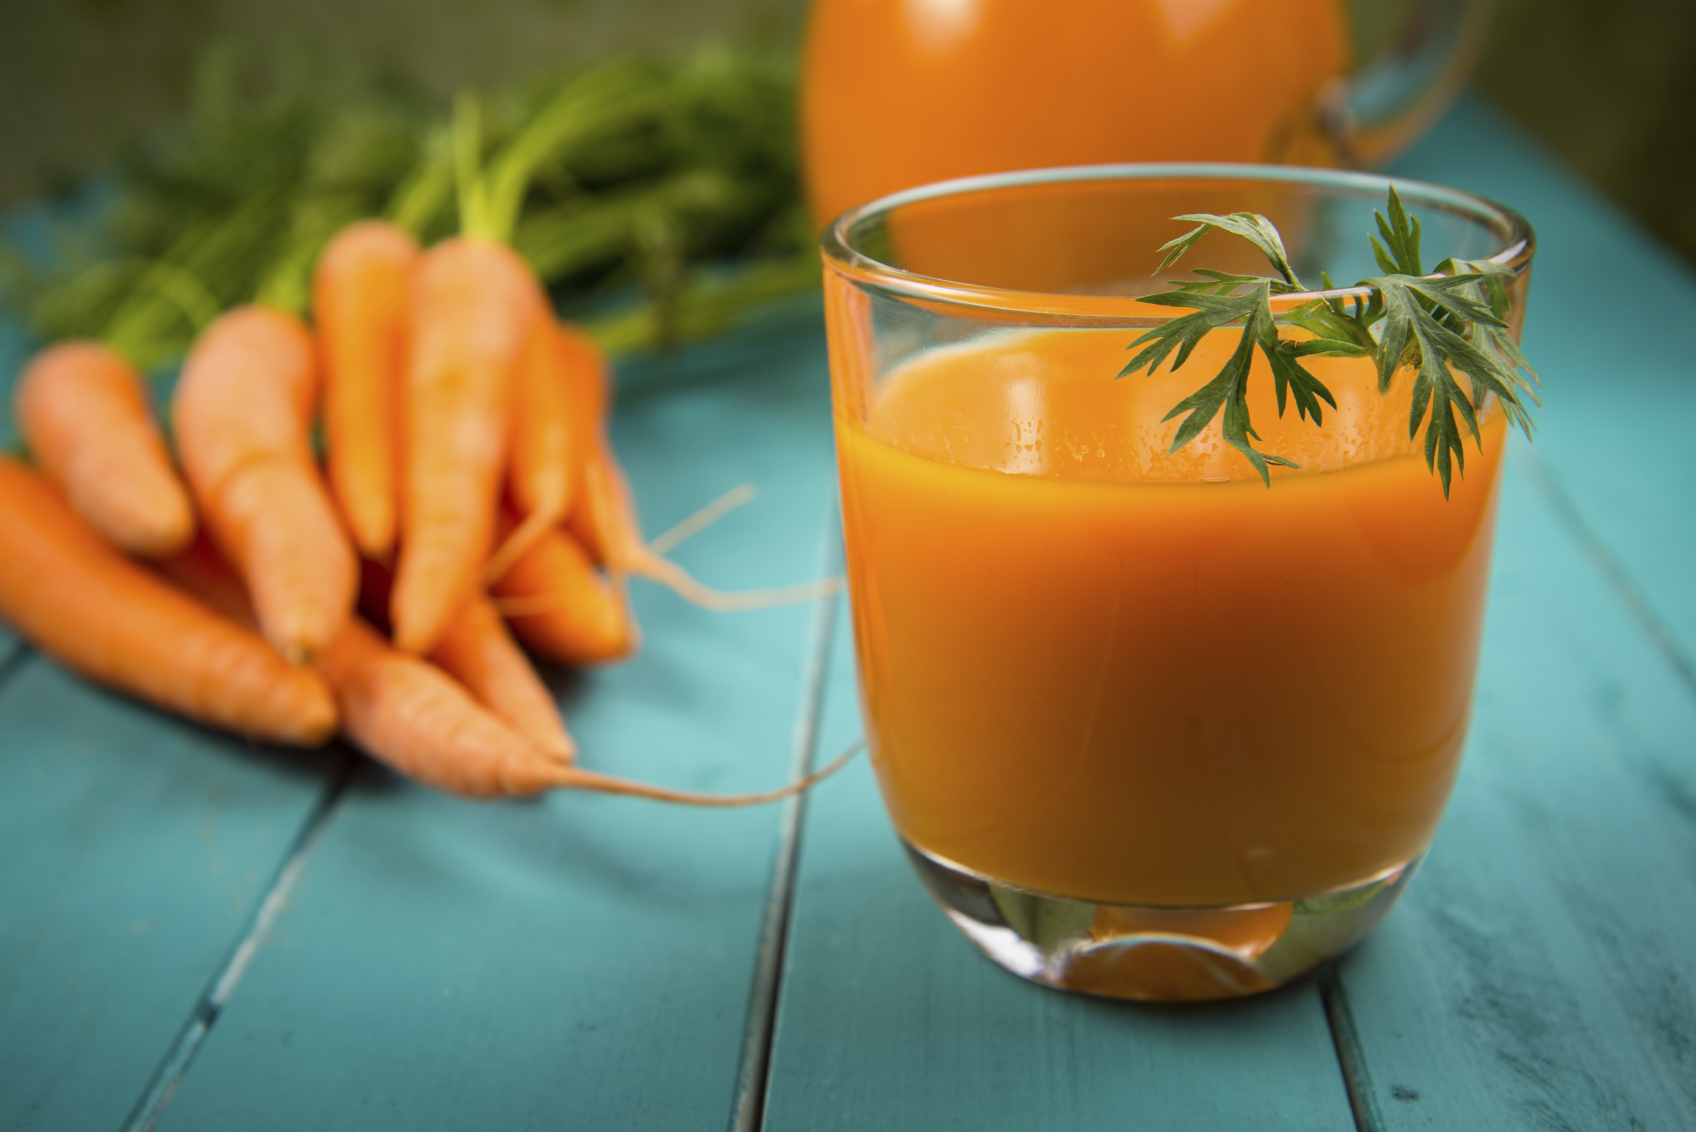 Make Good Carrot Juice With Milk Typical Of Lebak City